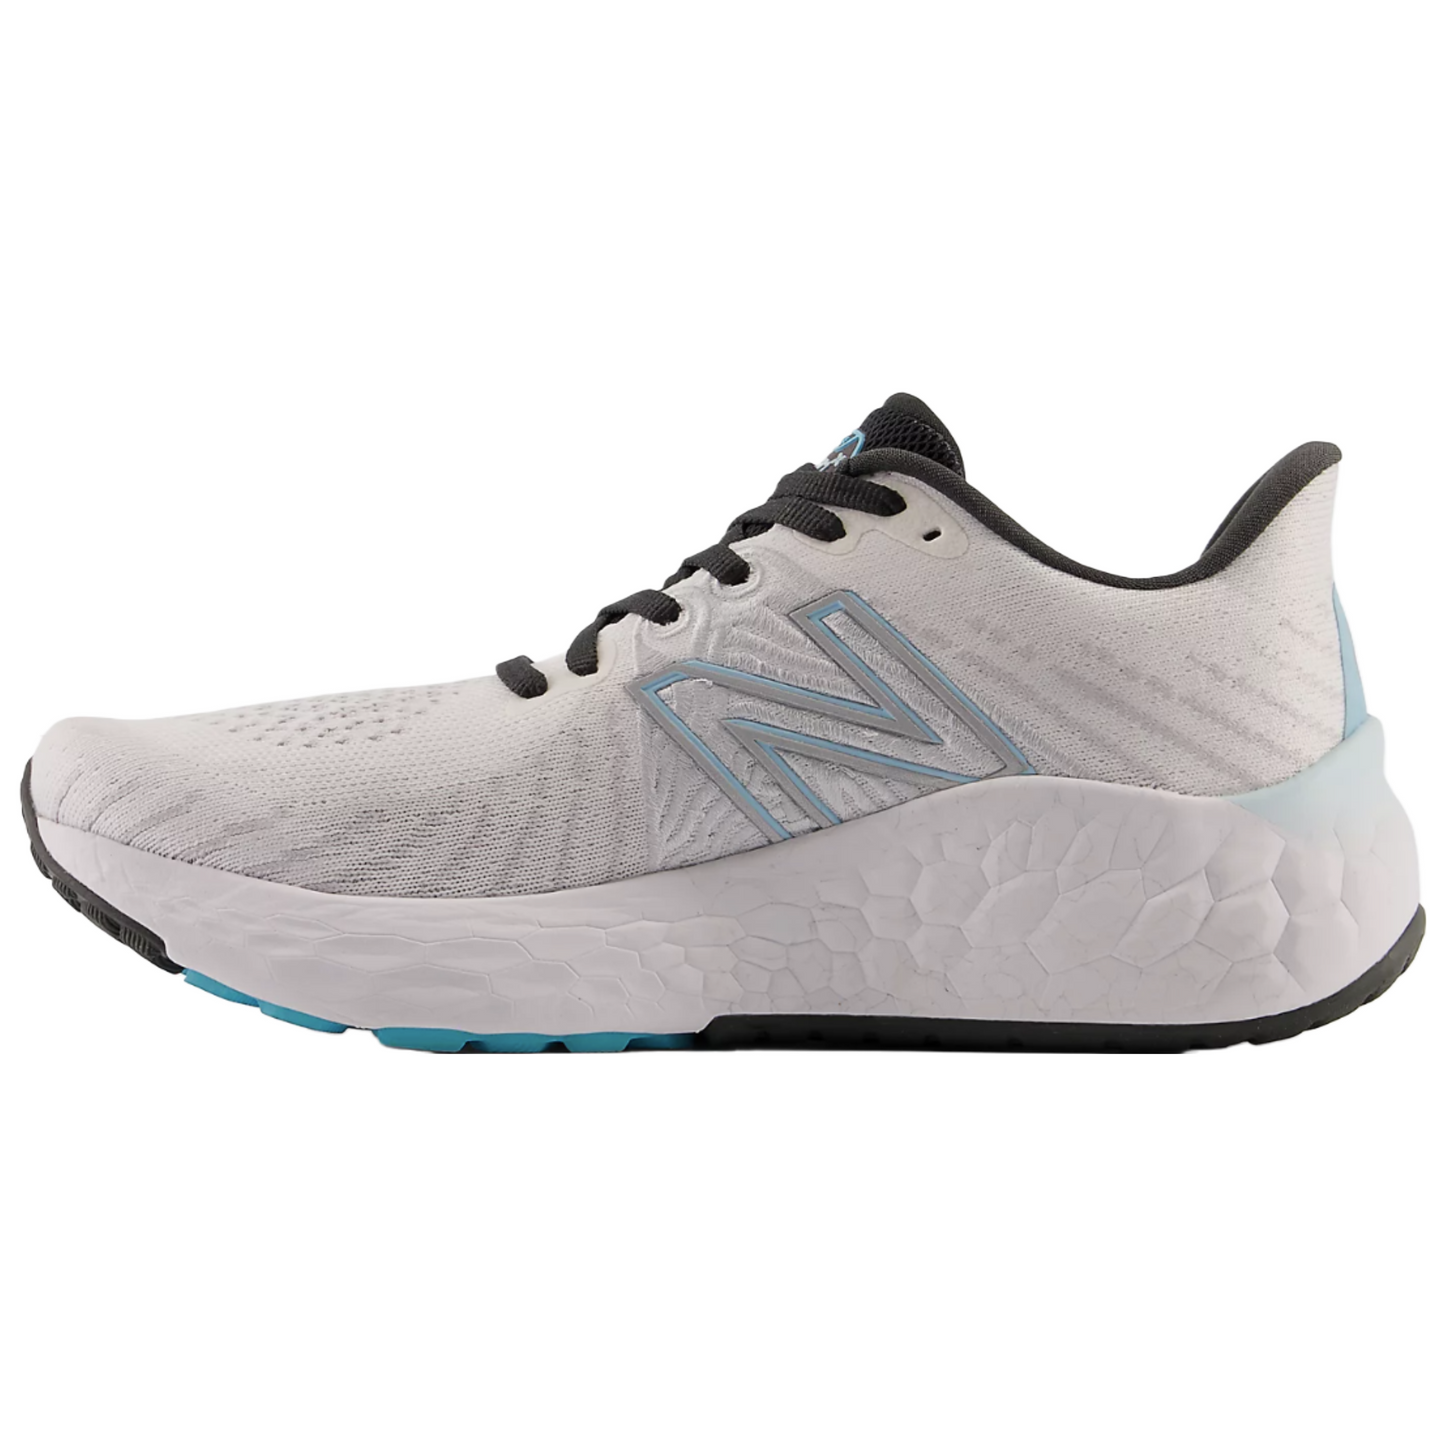 New Balance Vongo Running shoe in white with blue accents 